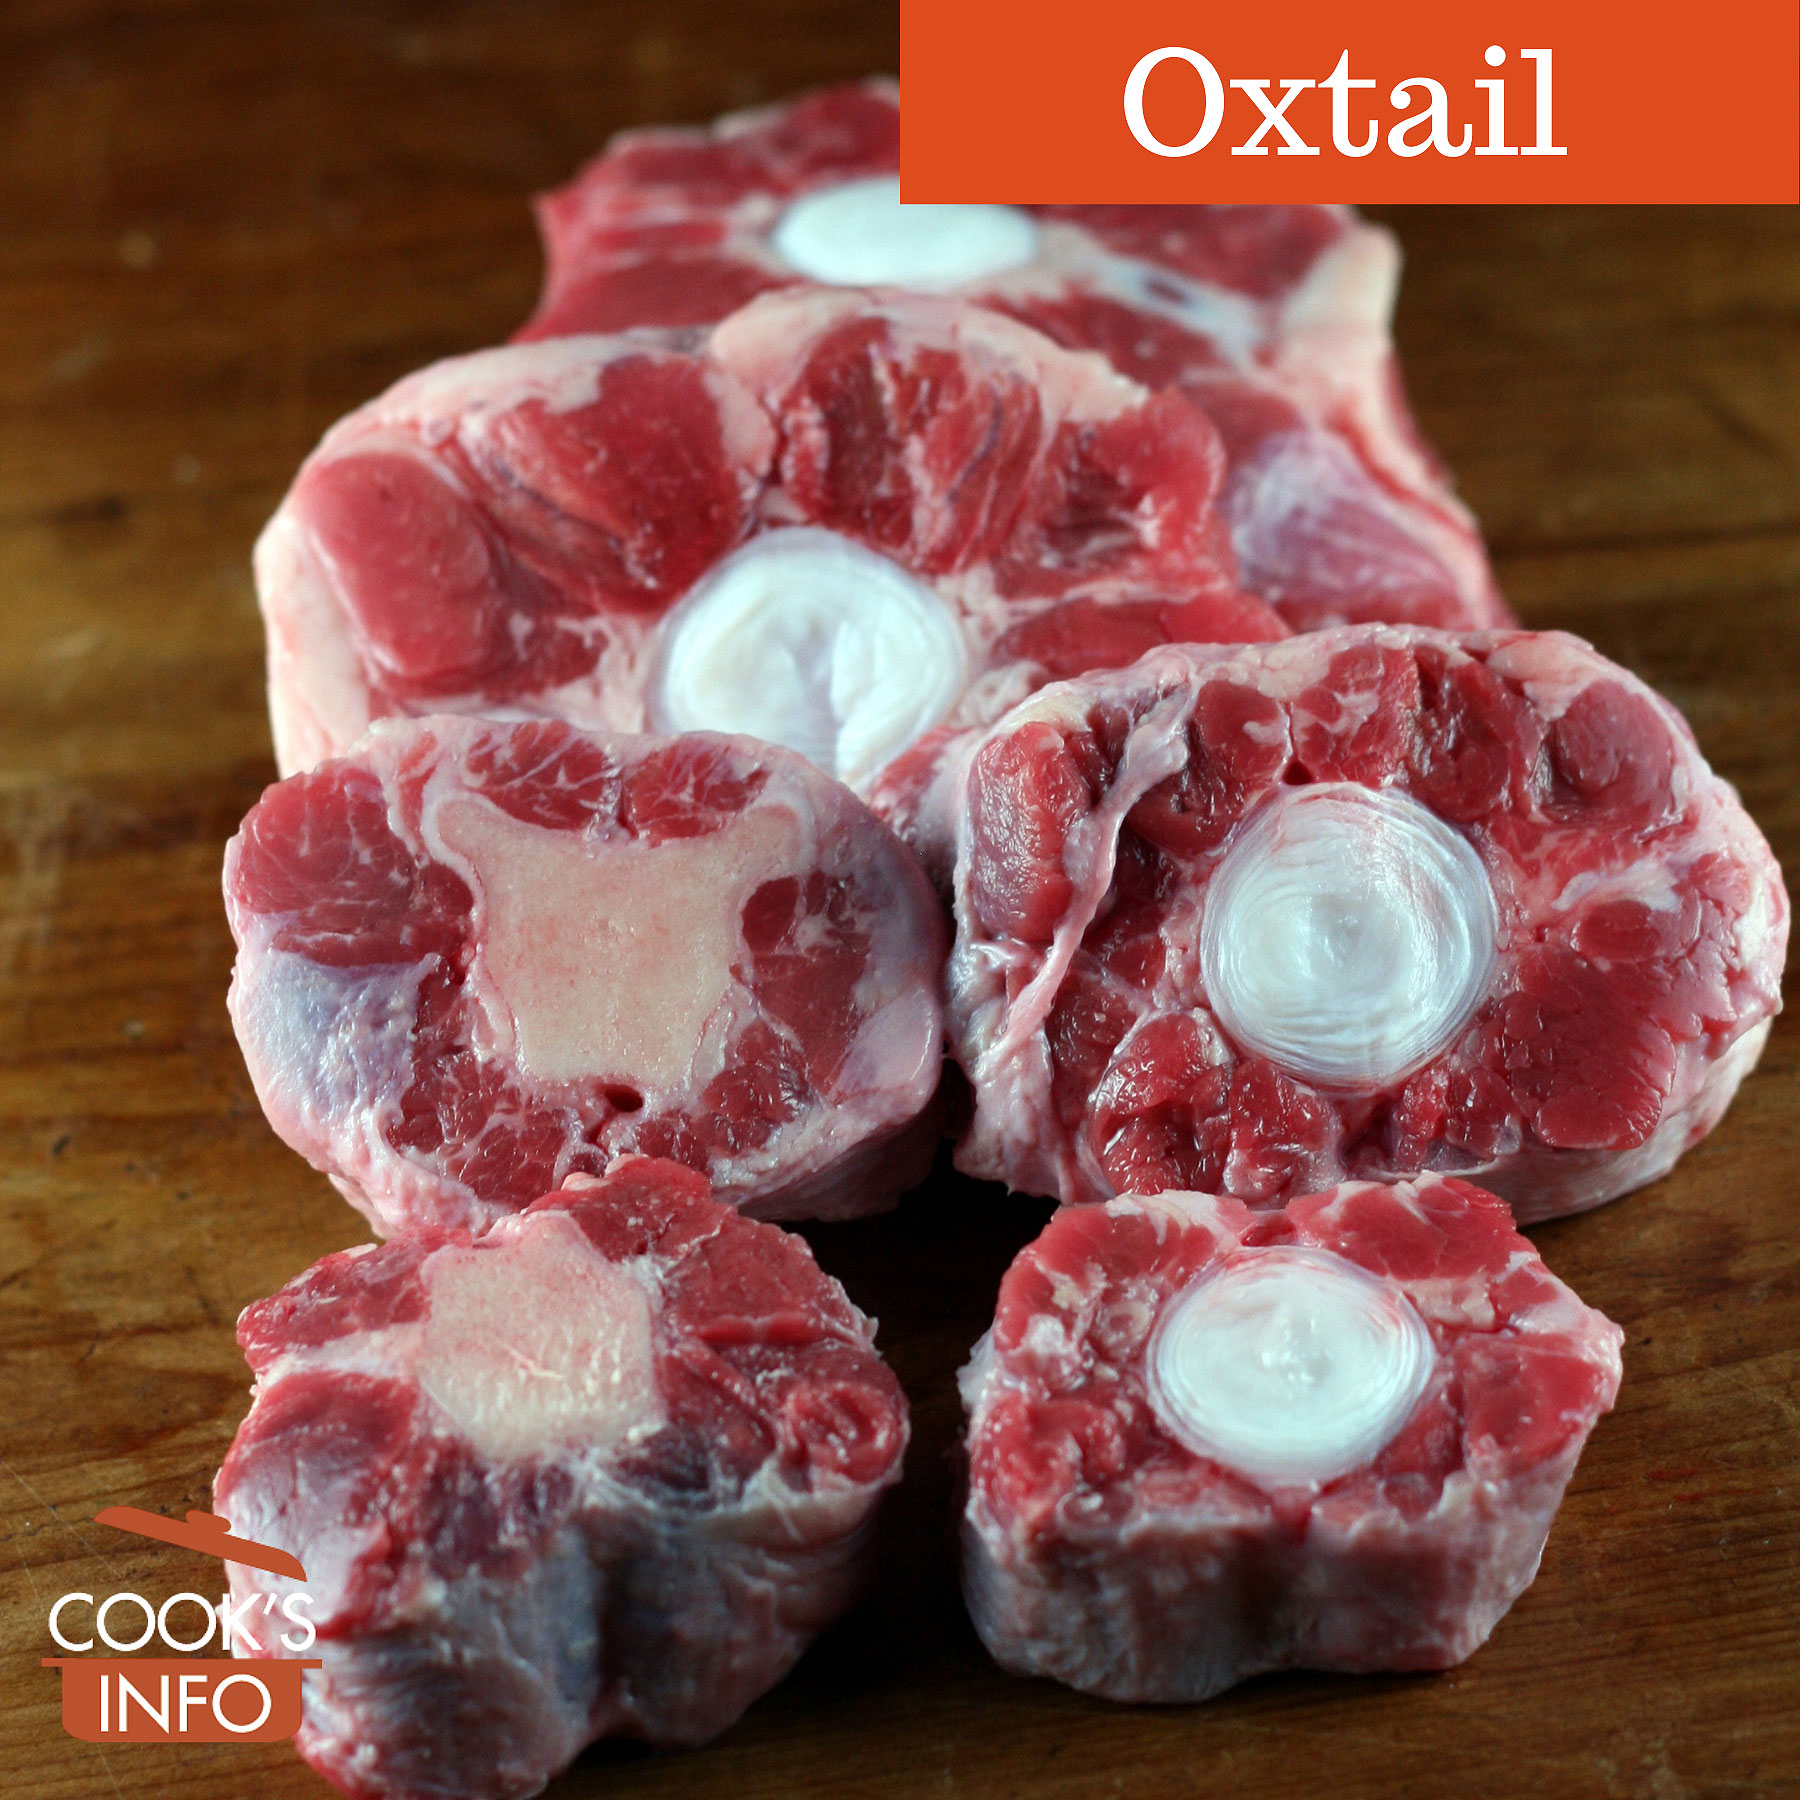 Is Oxtail Beef Or Pork? 